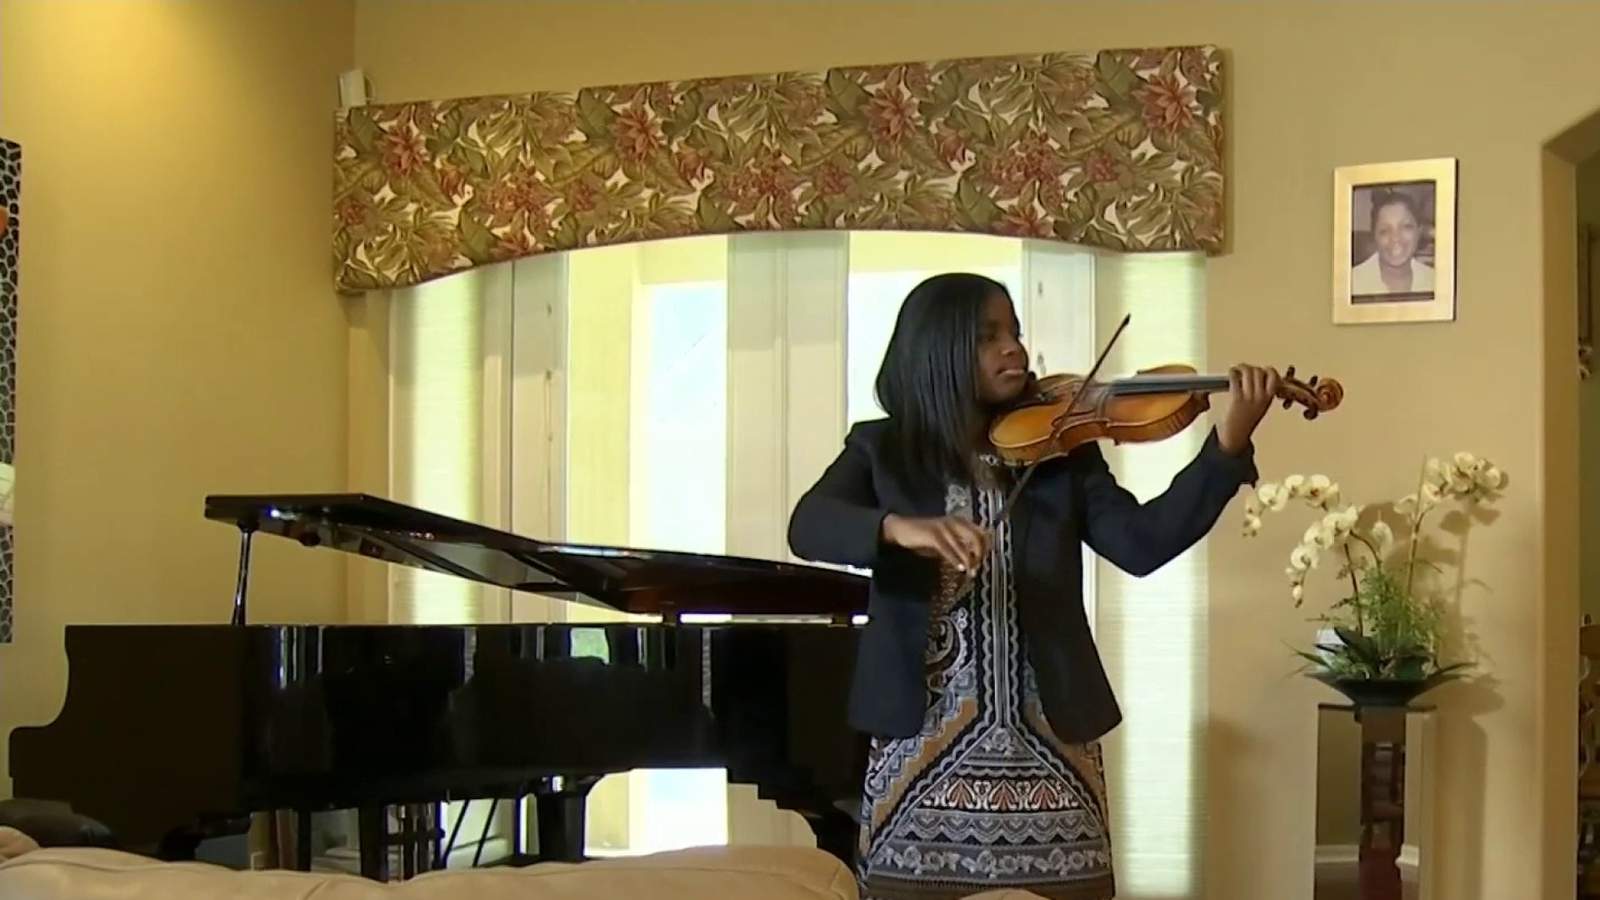 13-year-old Sanford violinist hopes to change the face of classical music